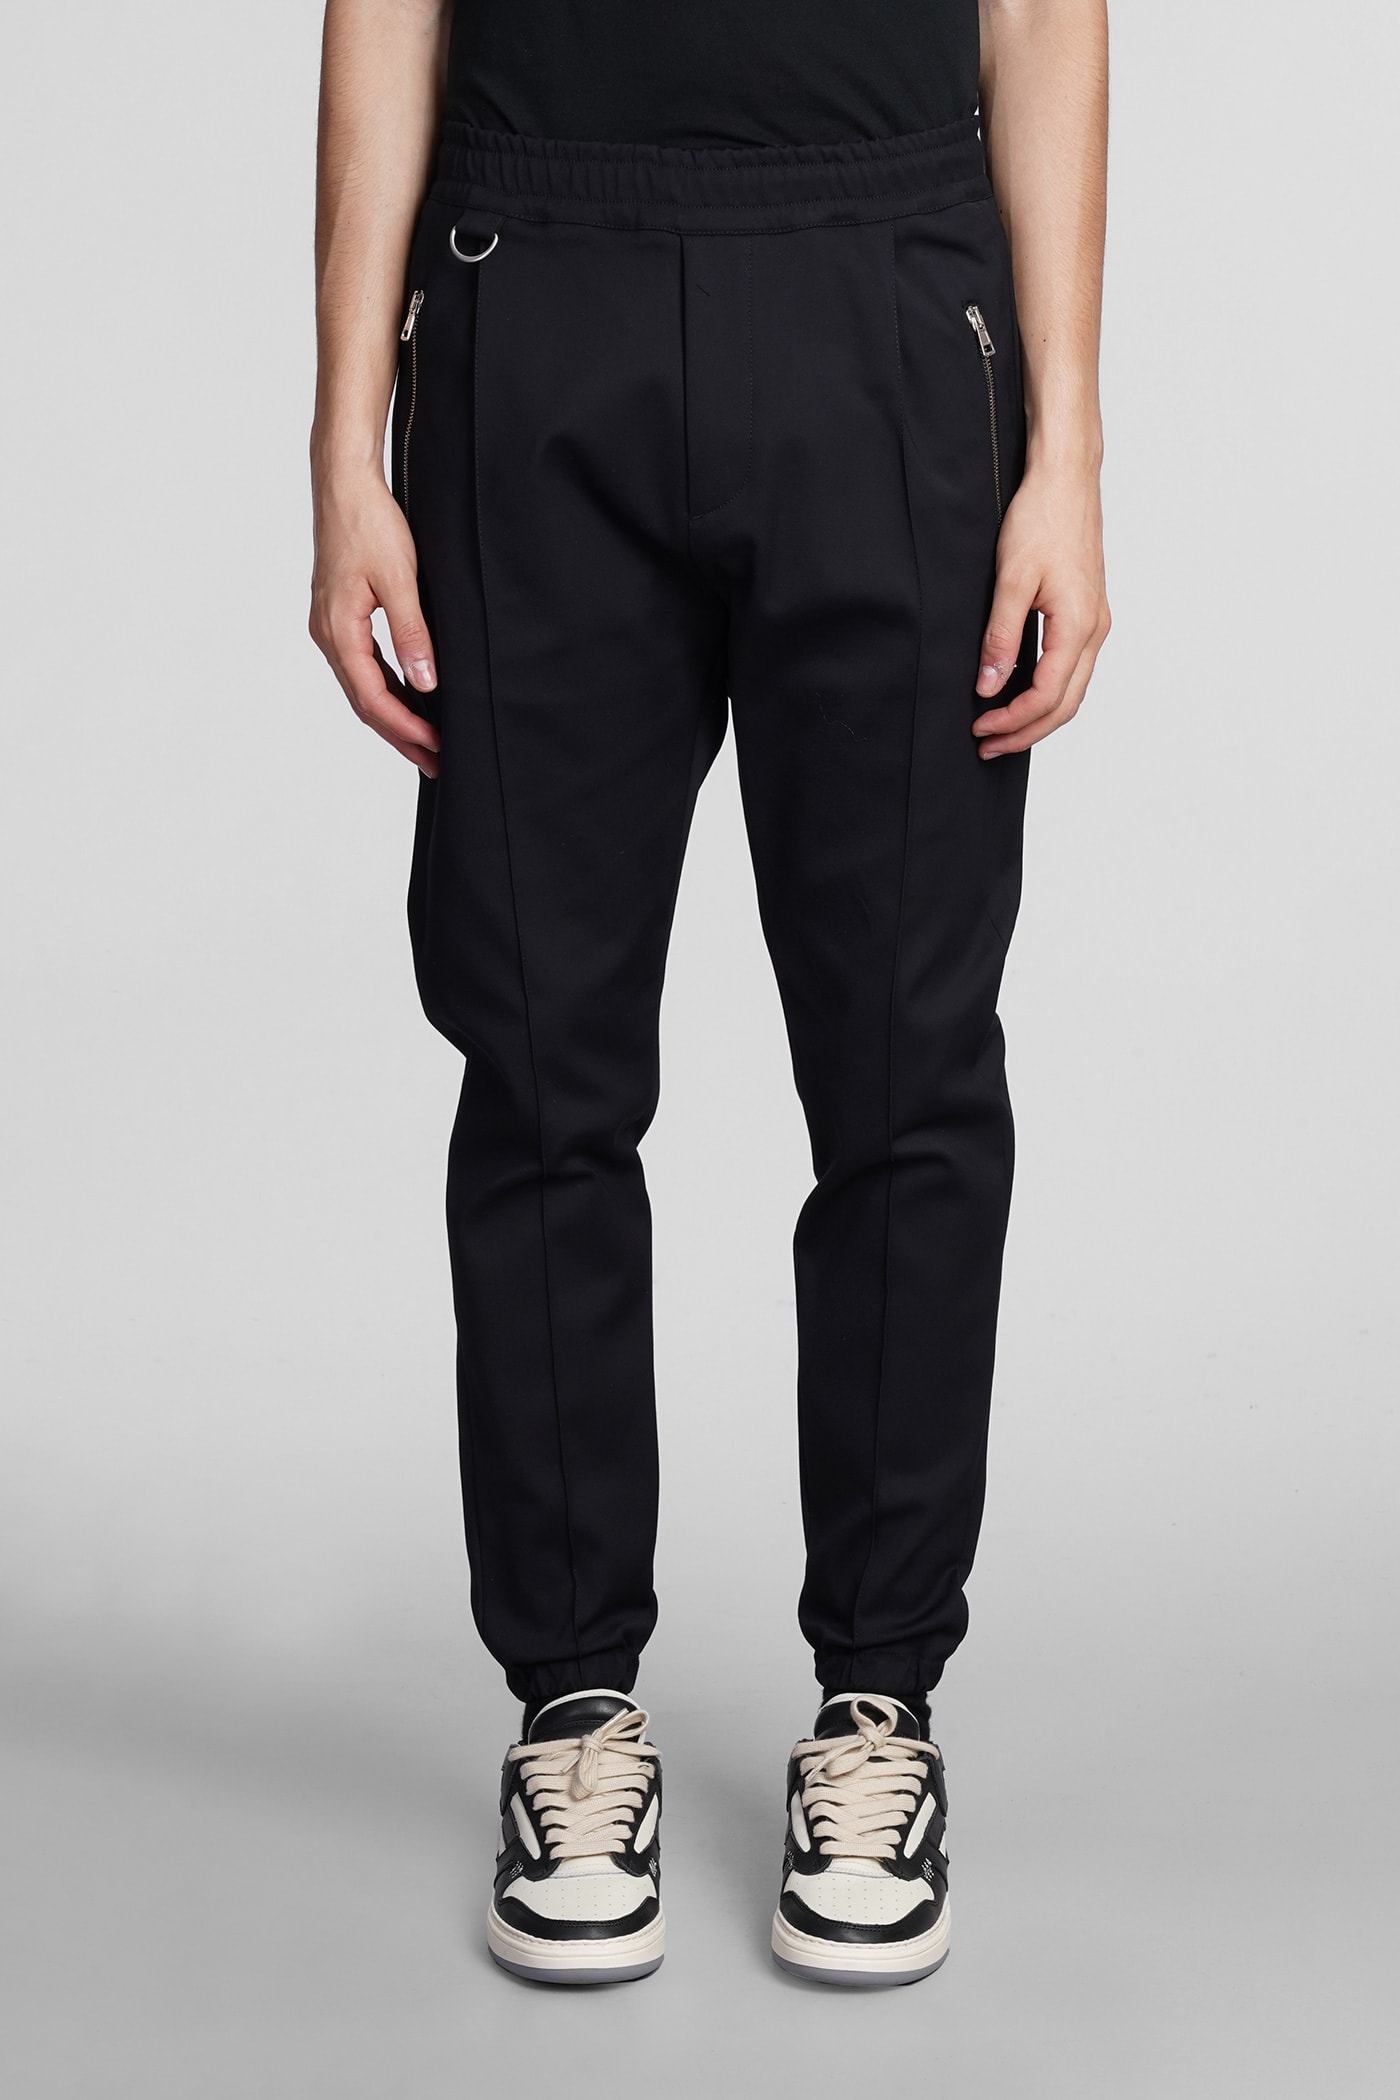 Low Brand Trousers In Black Cotton